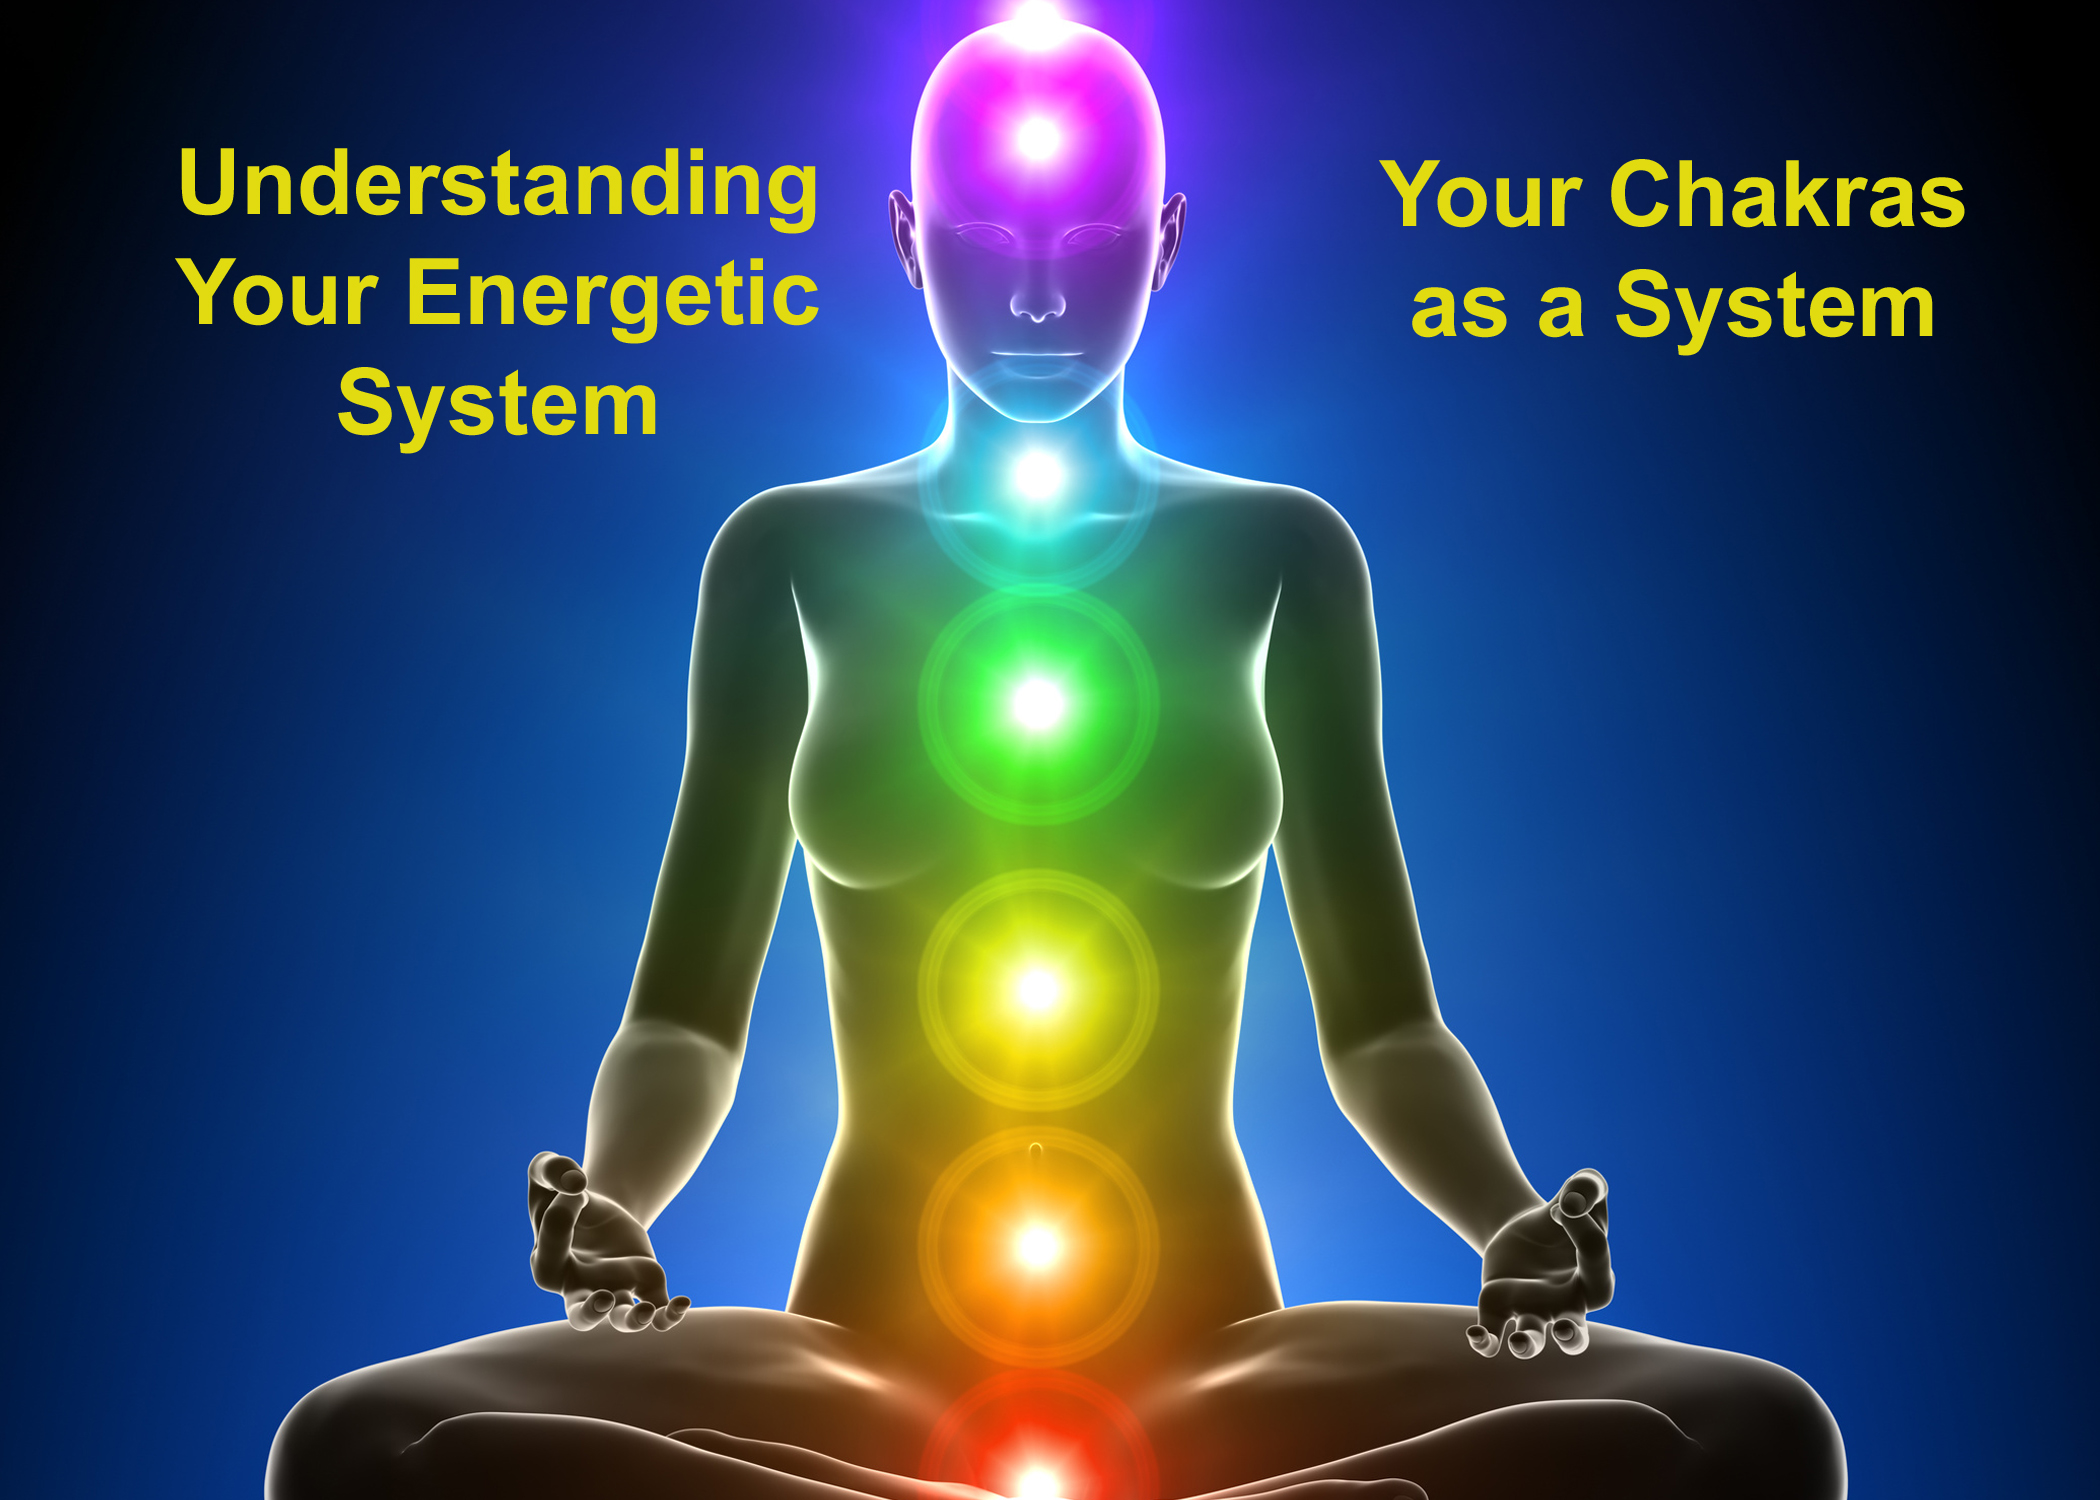 understand-your-energetic-system-basic-slide